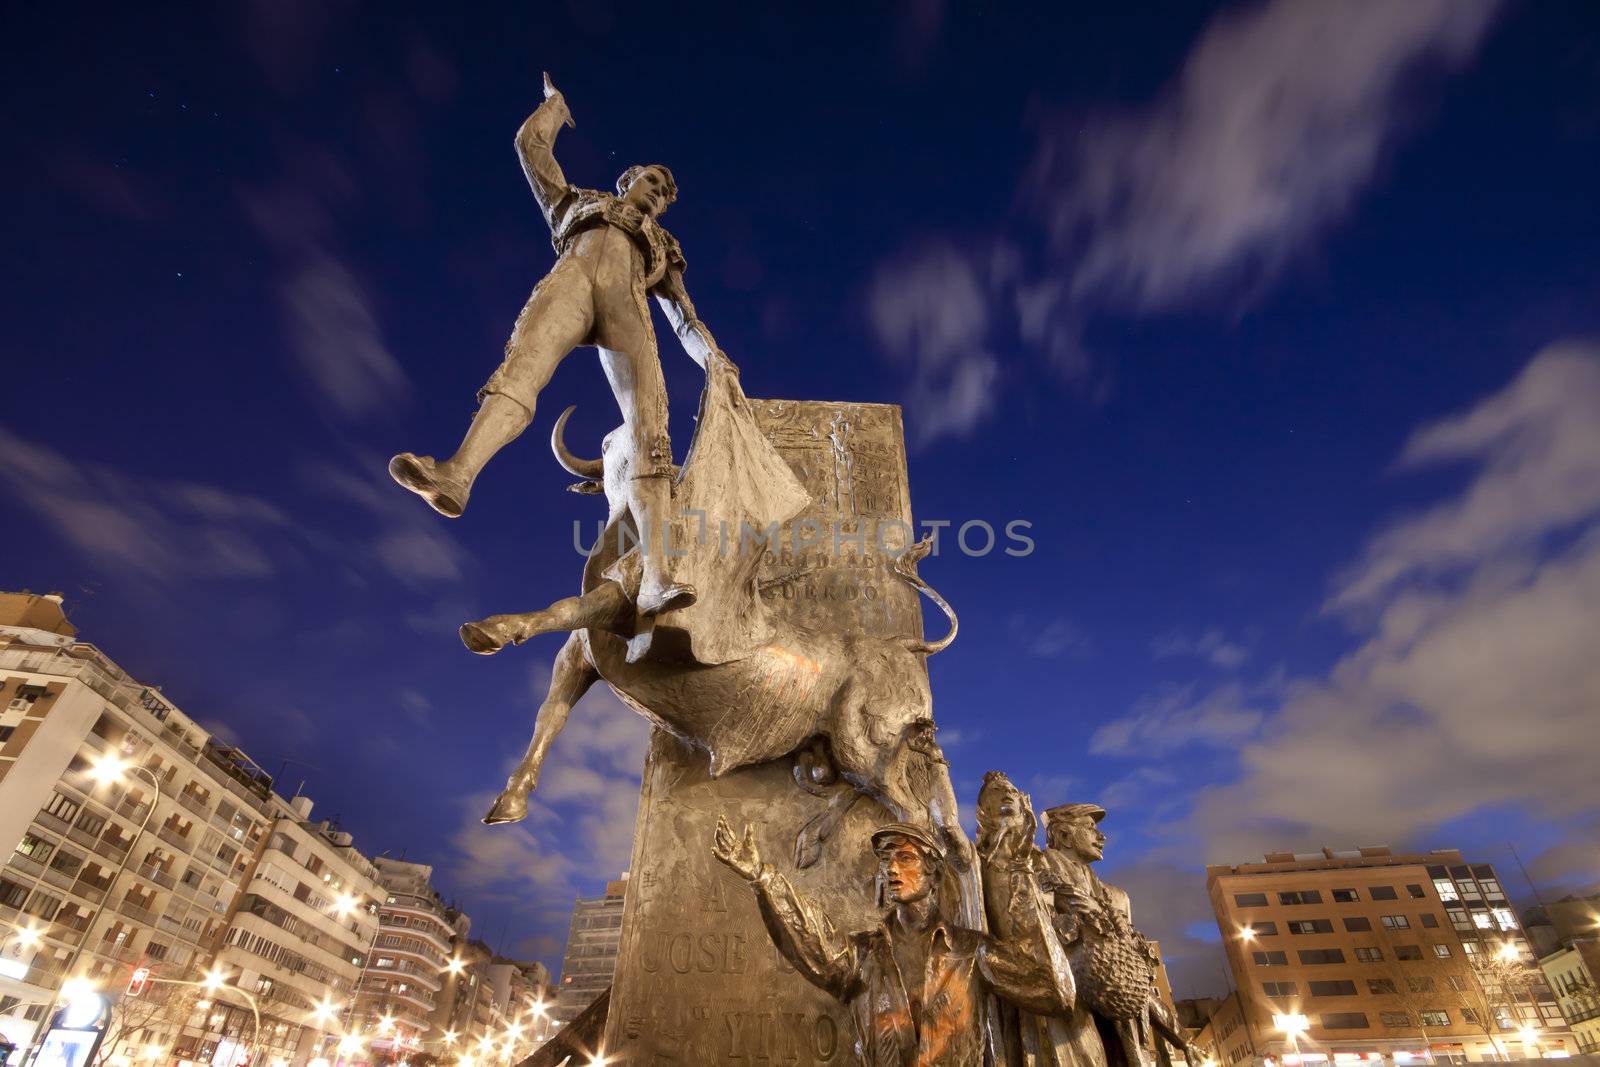 Monument in front of the bullring on the plaza de Torros, Ventas, Madrid, Spain